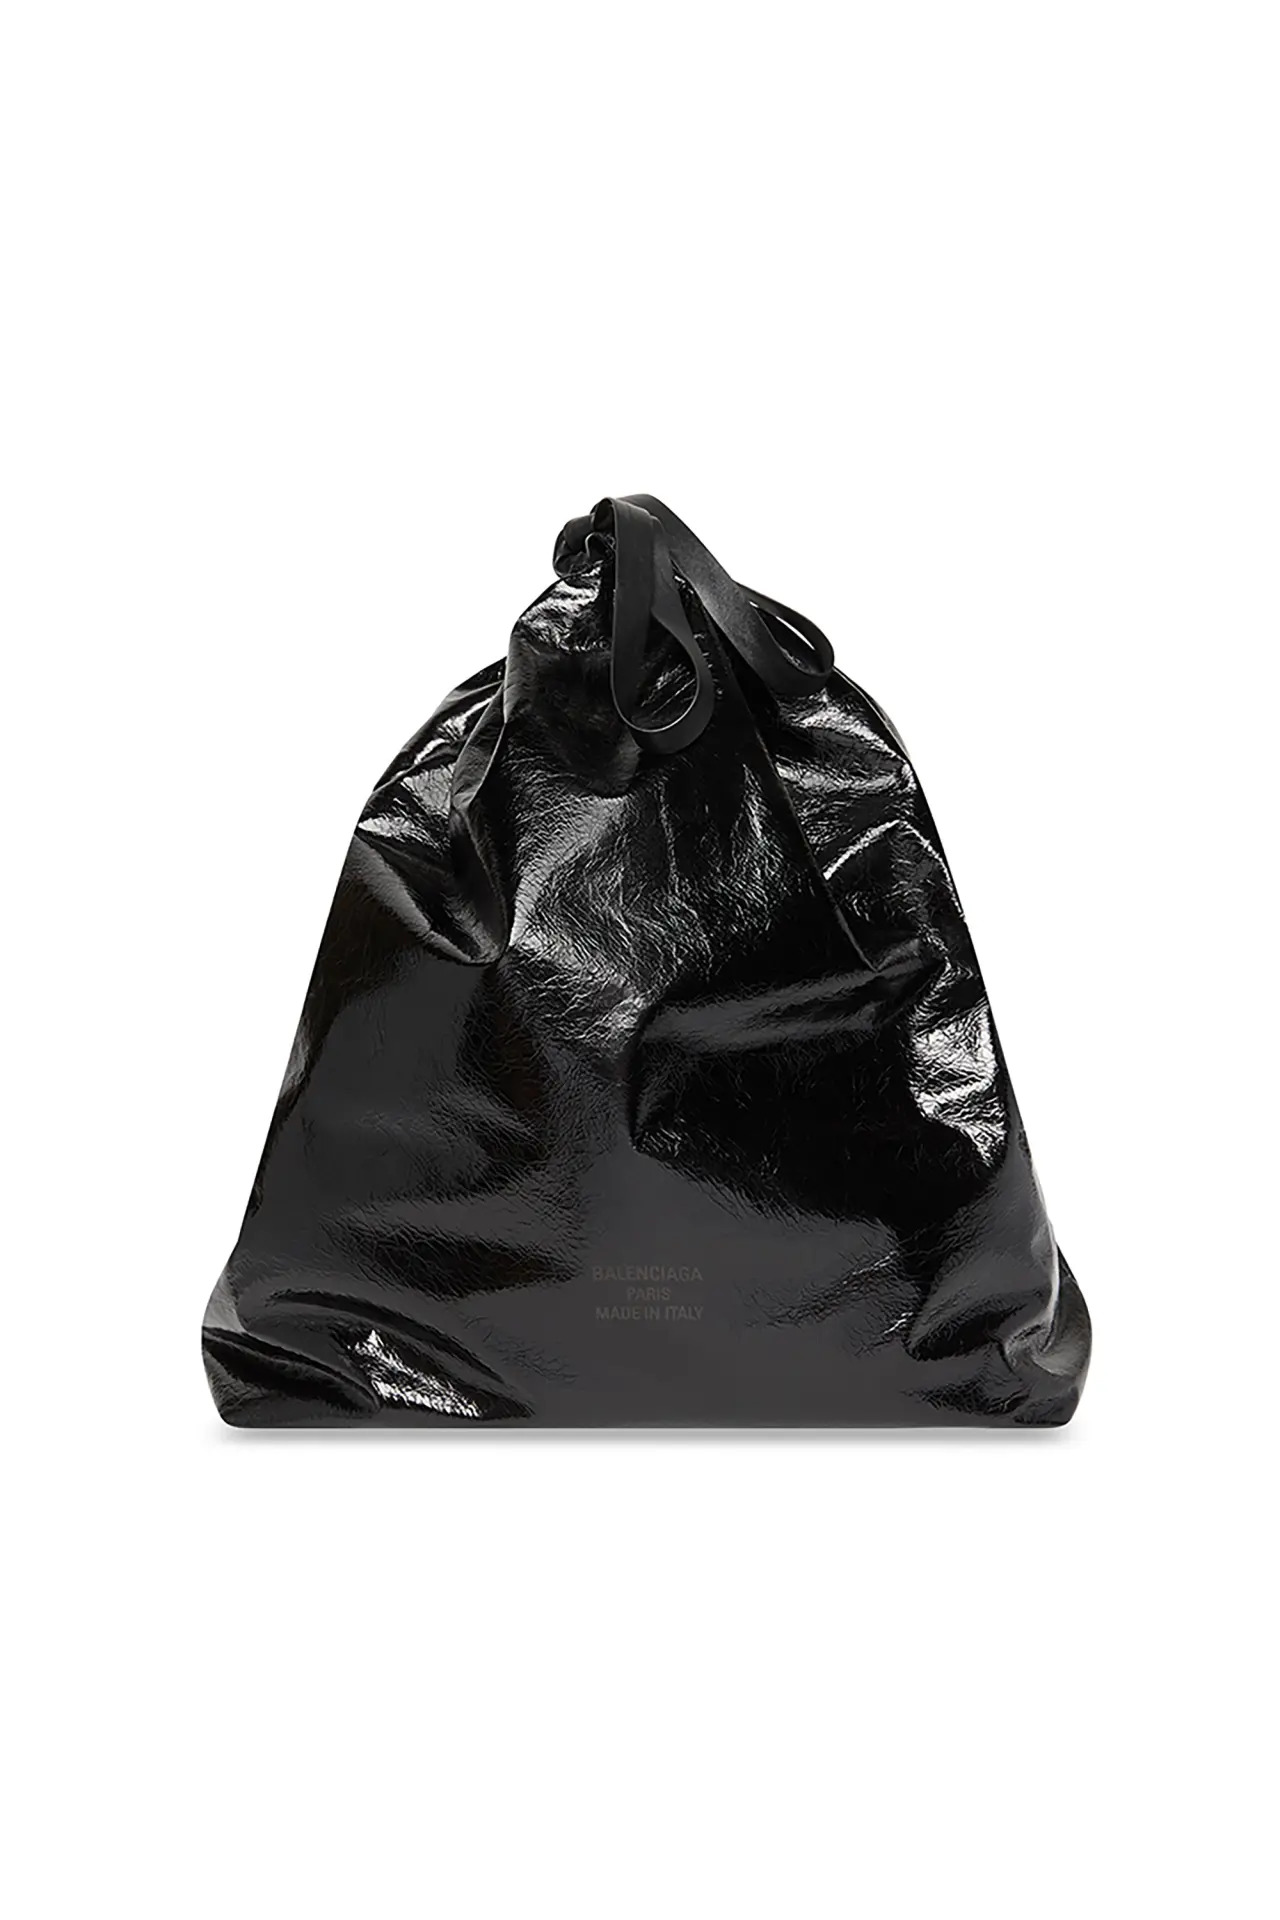 What Is The Balenciaga Trash Pouch And How Much Does It Cost